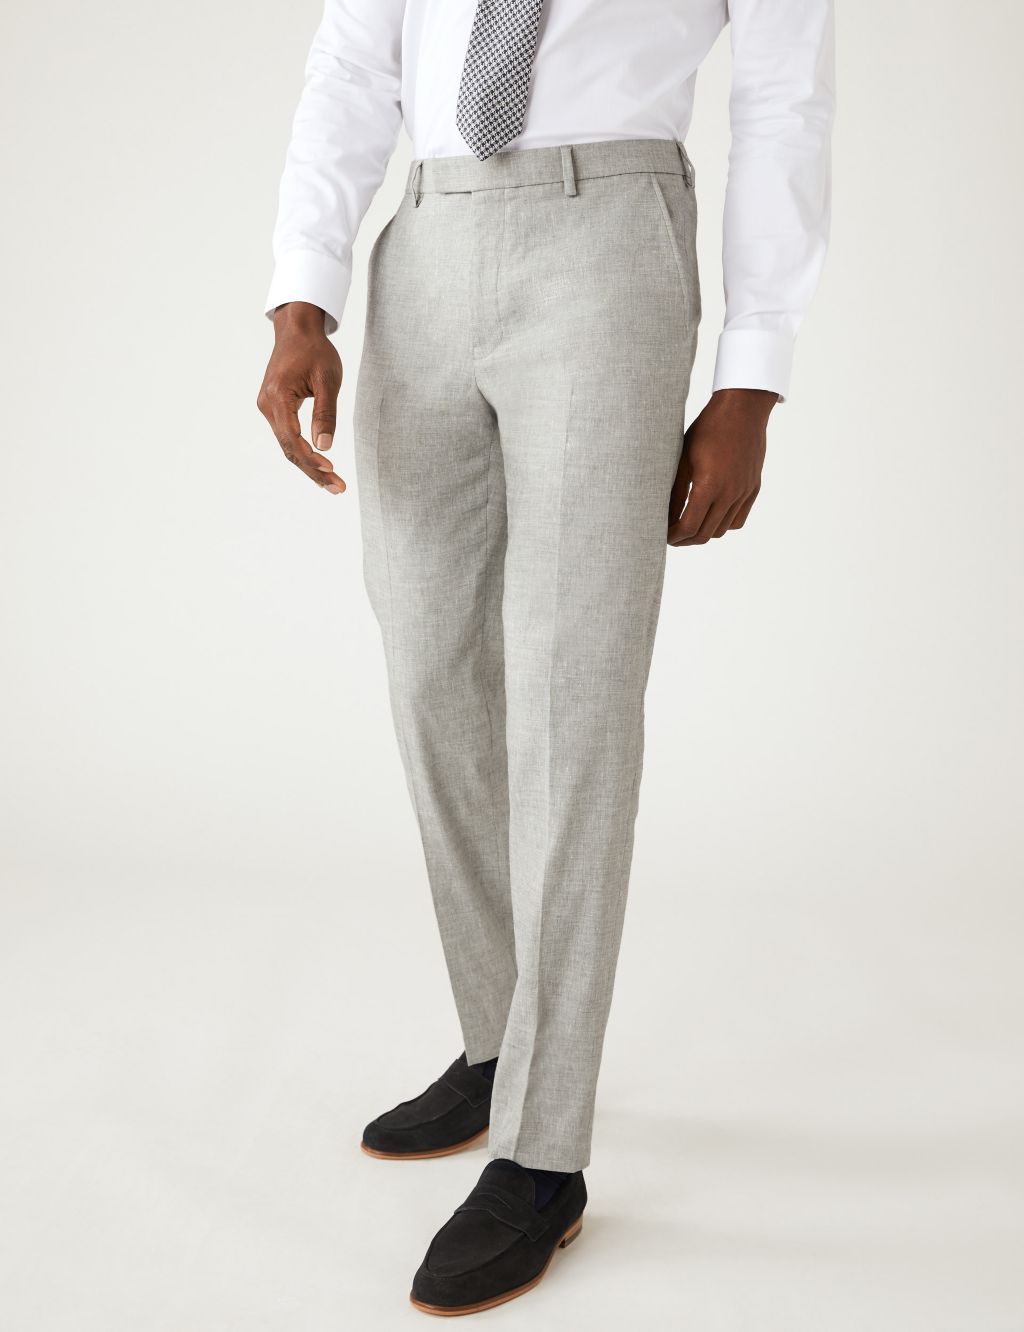 Tailored Fit Italian Linen Miracle™ Suit image 5